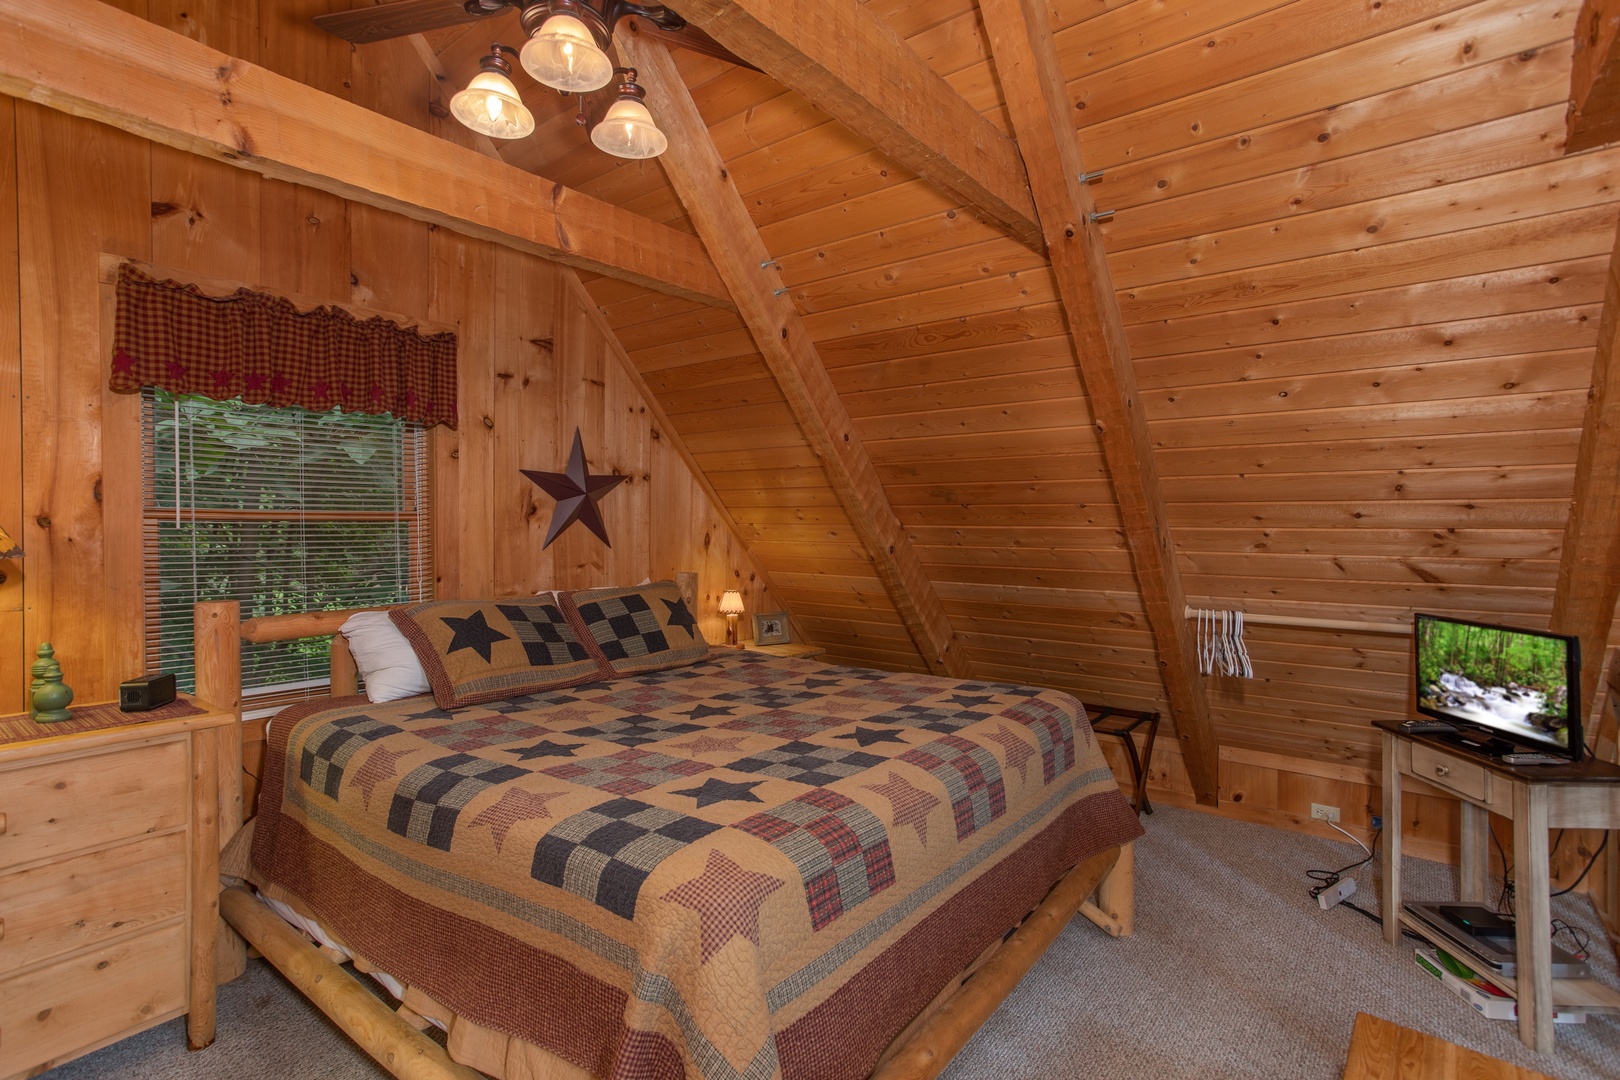 King-sized bed in the loft at Bearfoot Crossing, a 1-bedroom cabin rental located in Pigeon Forge